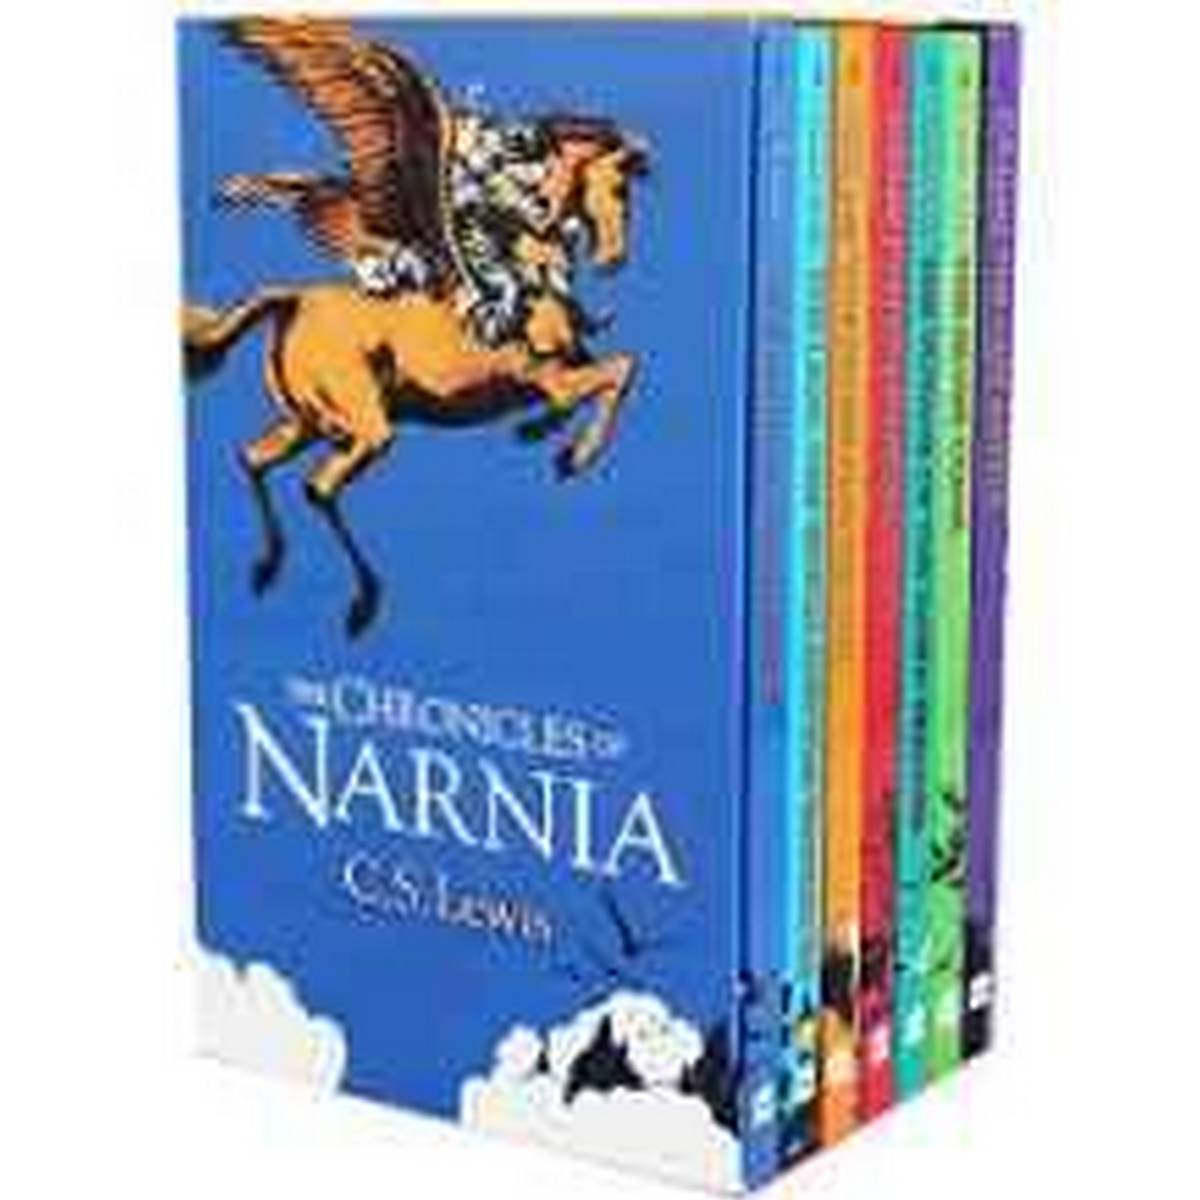 The Chronicles of Narnia Box Set